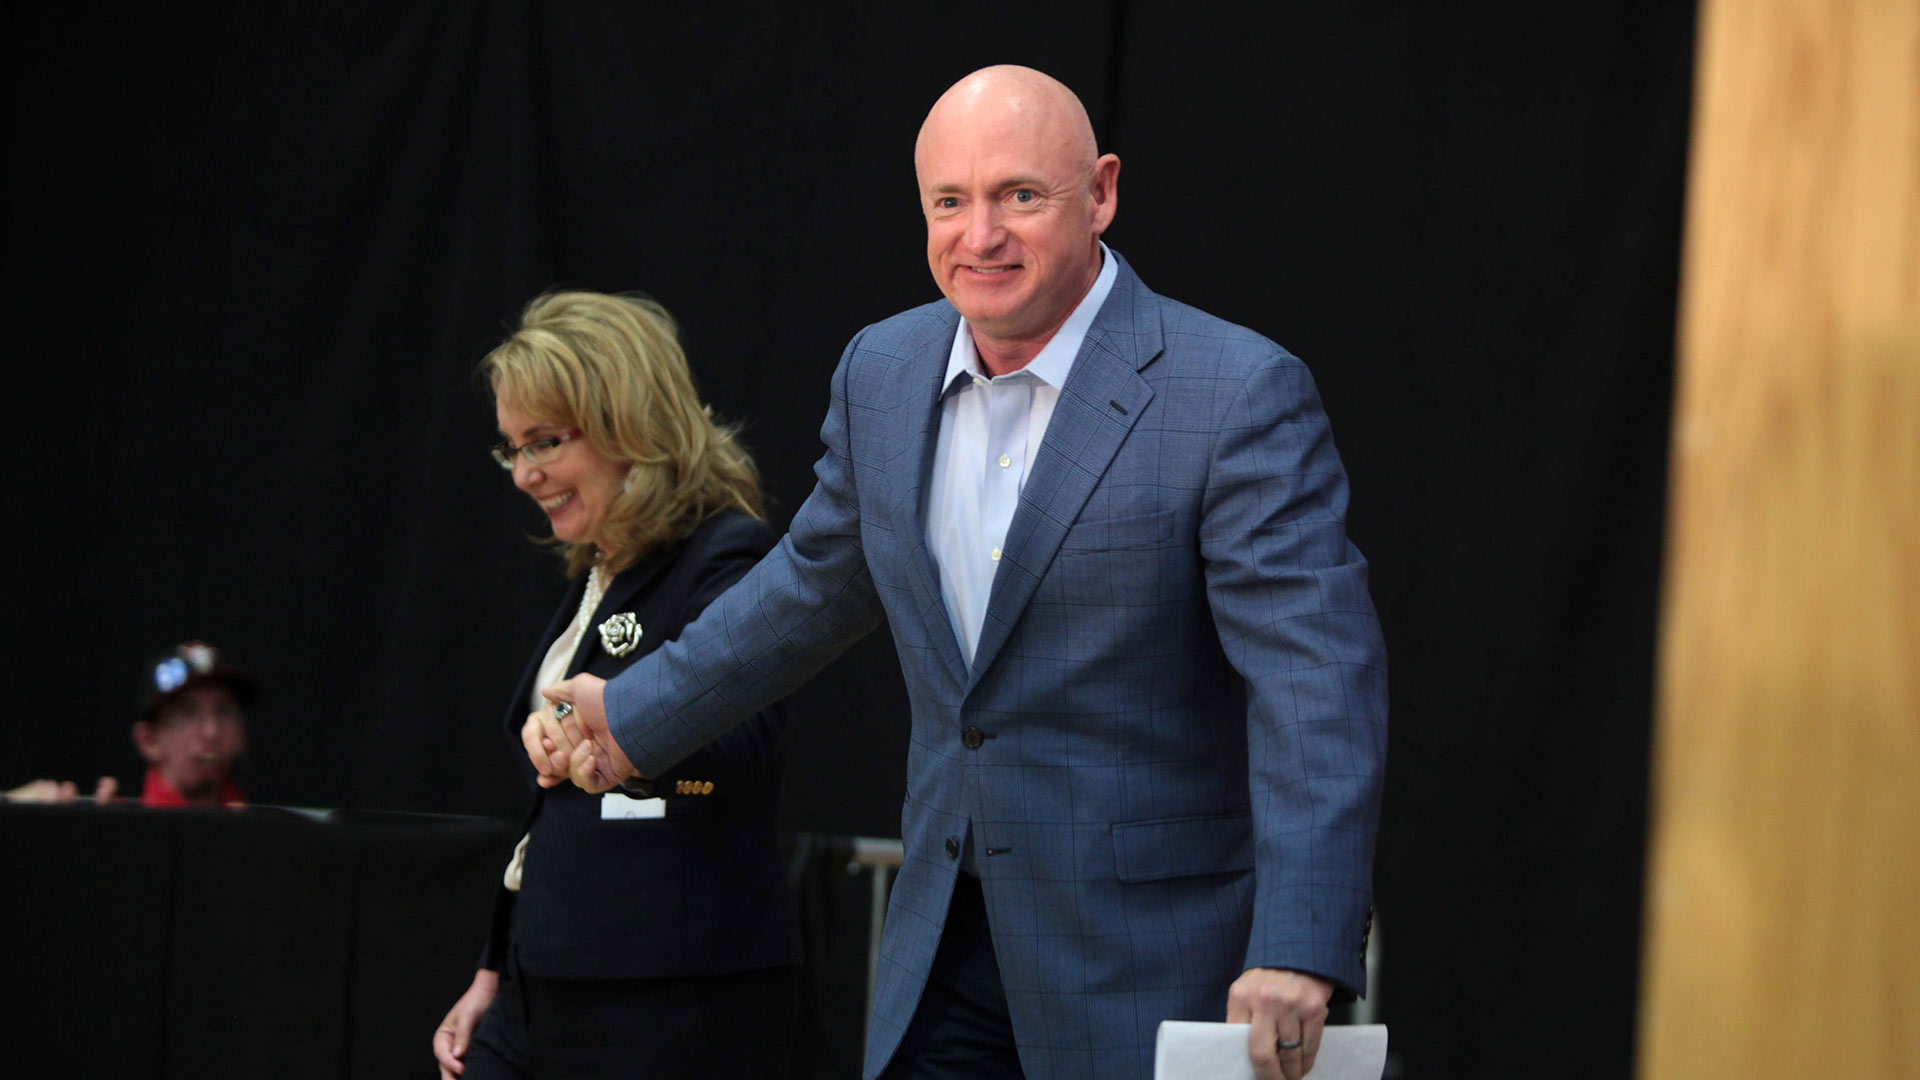 Former astronaut Mark Kelly — seen in this 2016 photo with his wife, former congresswoman Gabrielle Giffords — has announced he'll run for U.S. Senate in 2020. 